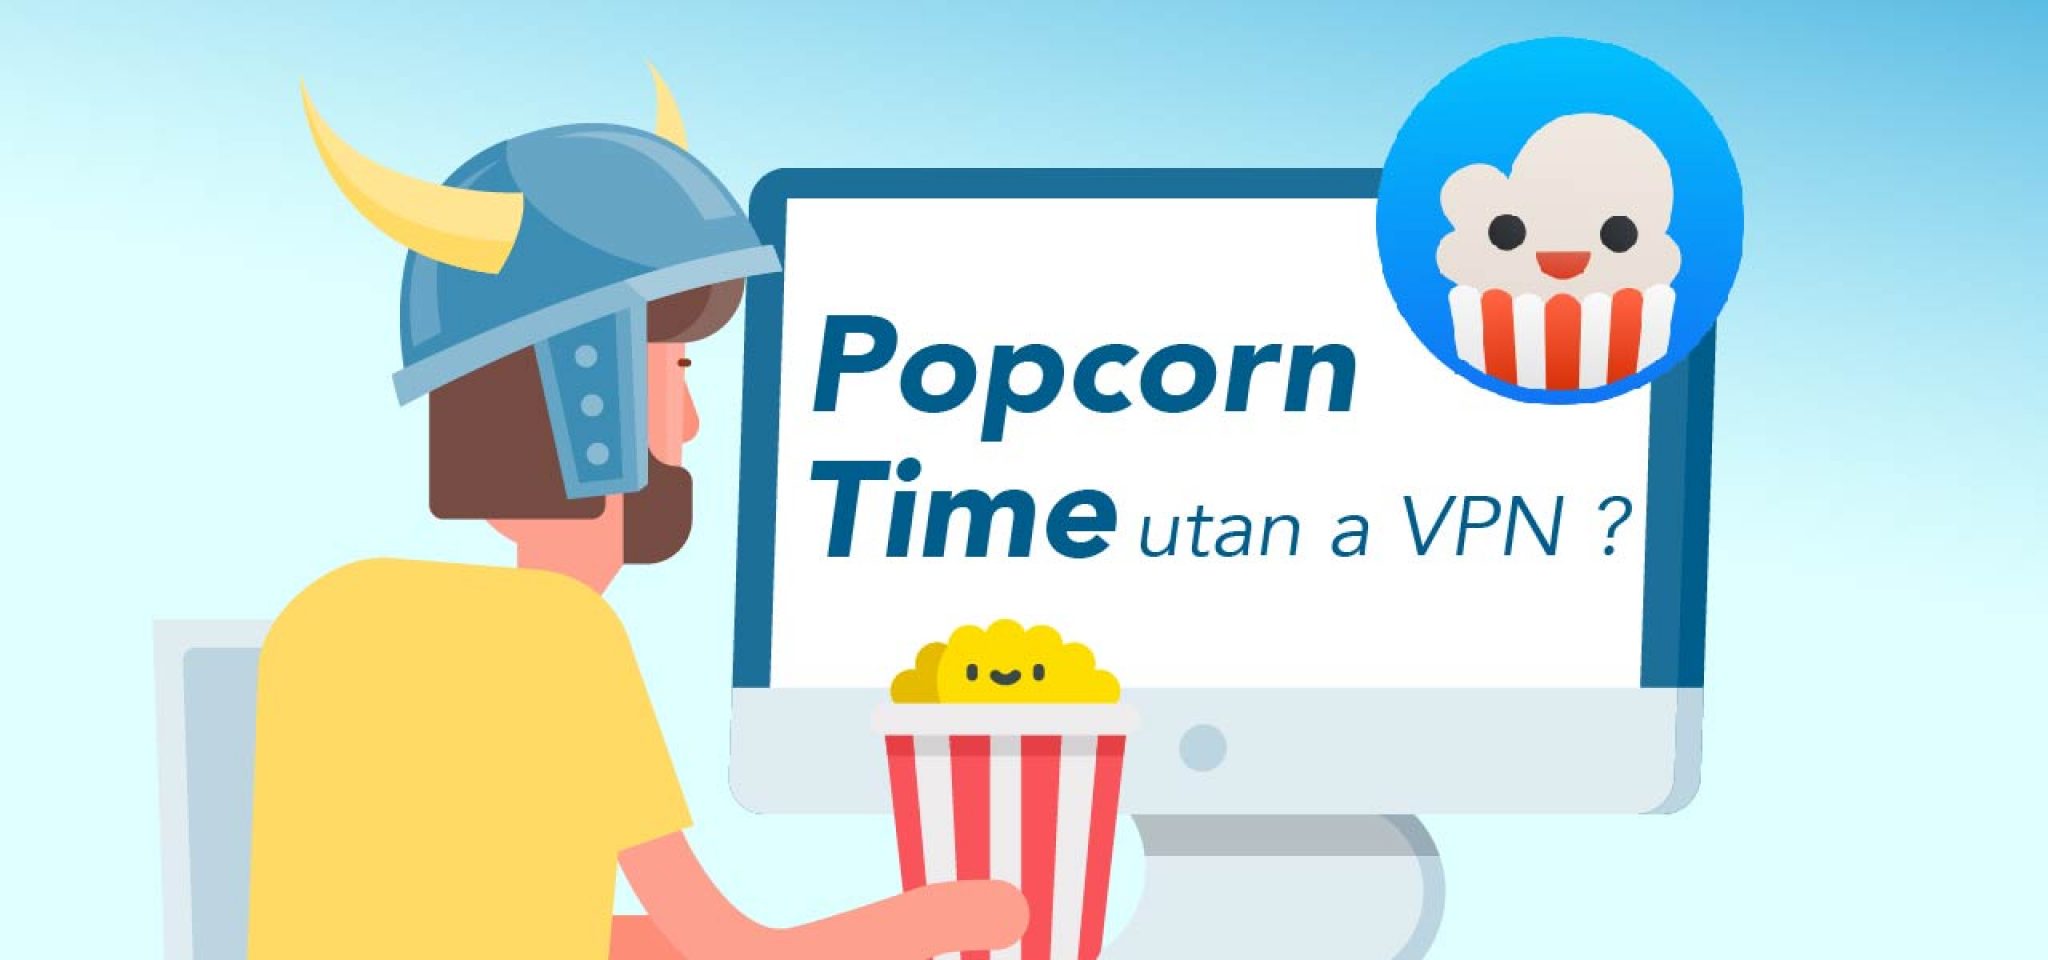 official popcorn time